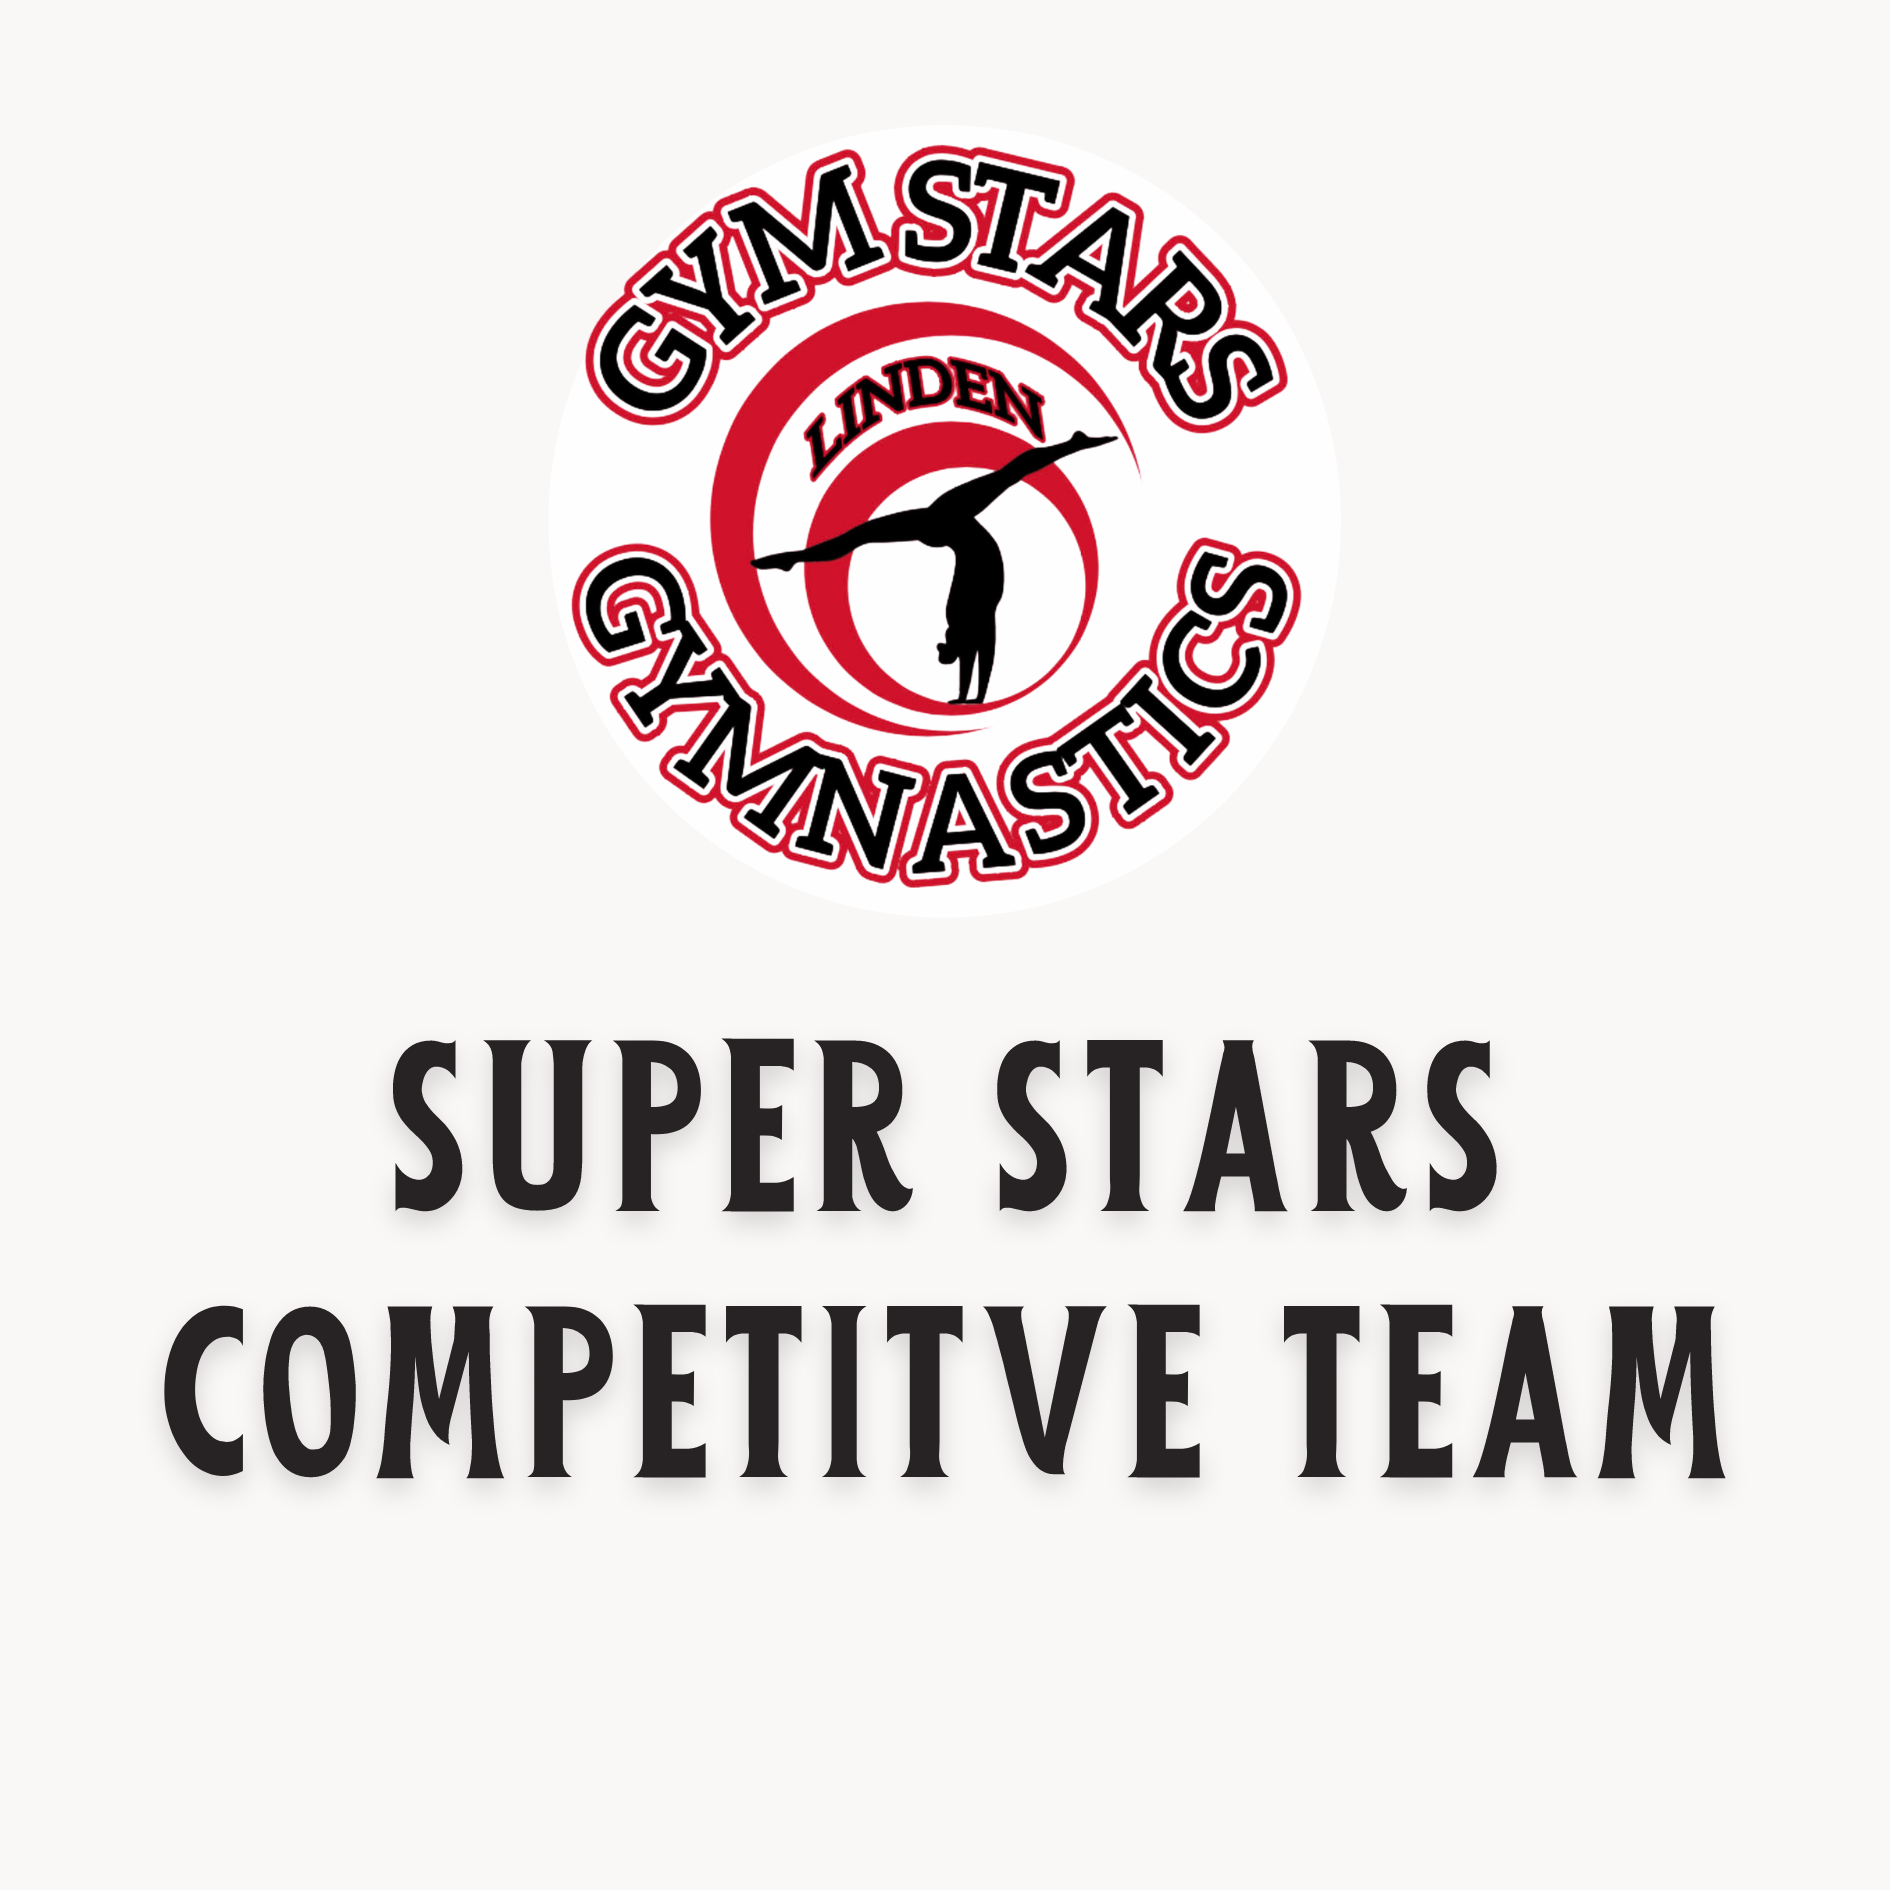 Logo and text: super stars cometitive team